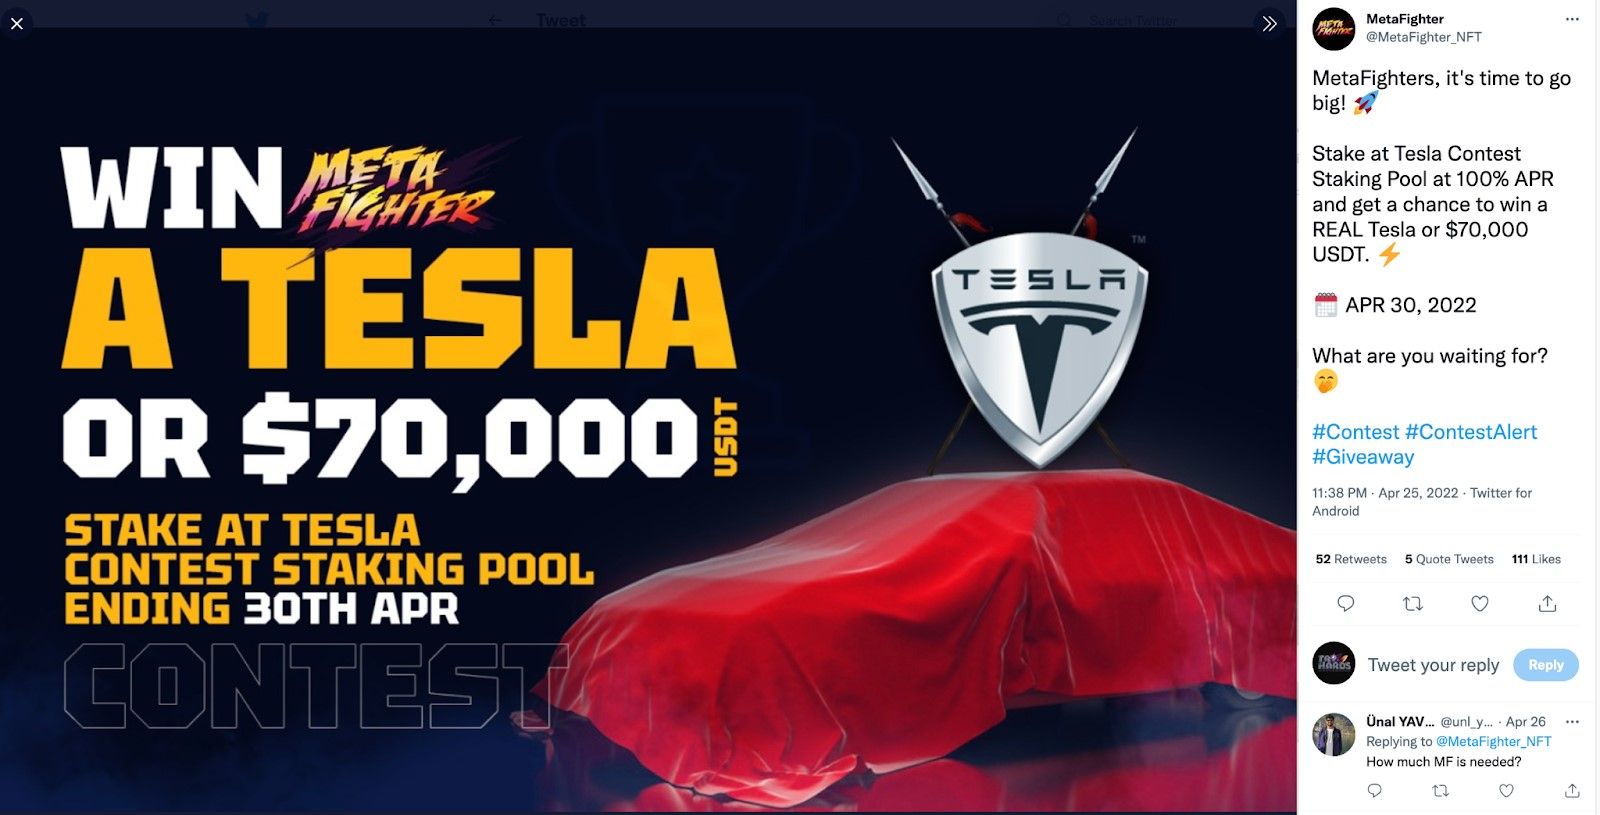 MetaWise organized a hugely successful “Win a Tesla” viral contest for MetaFighter to raise pre-seed funding